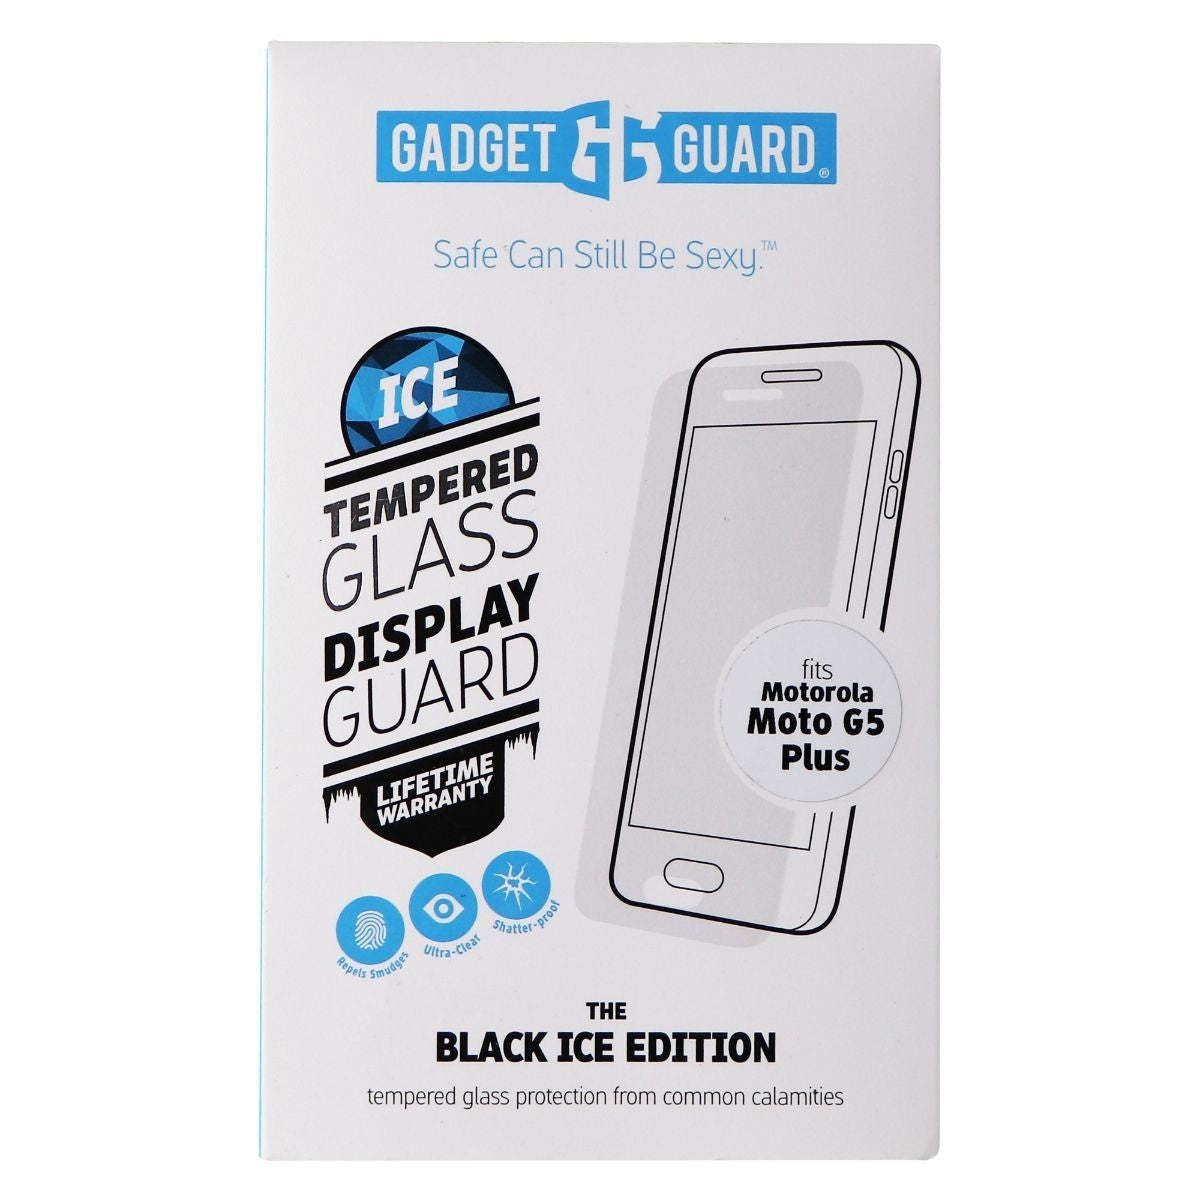 Gadget Guard Black Ice Tempered Glass Screen for Motorola Moto G5 Plus - Clear